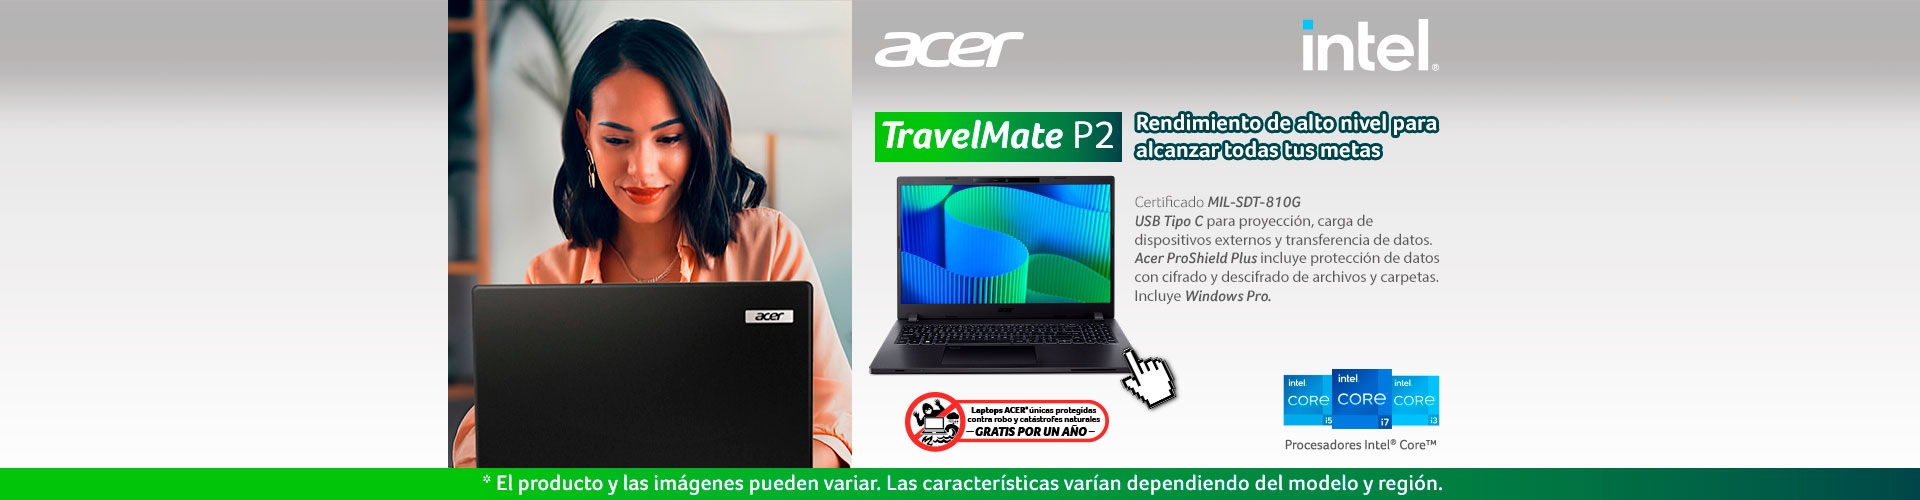 Travel Mate Acer P2